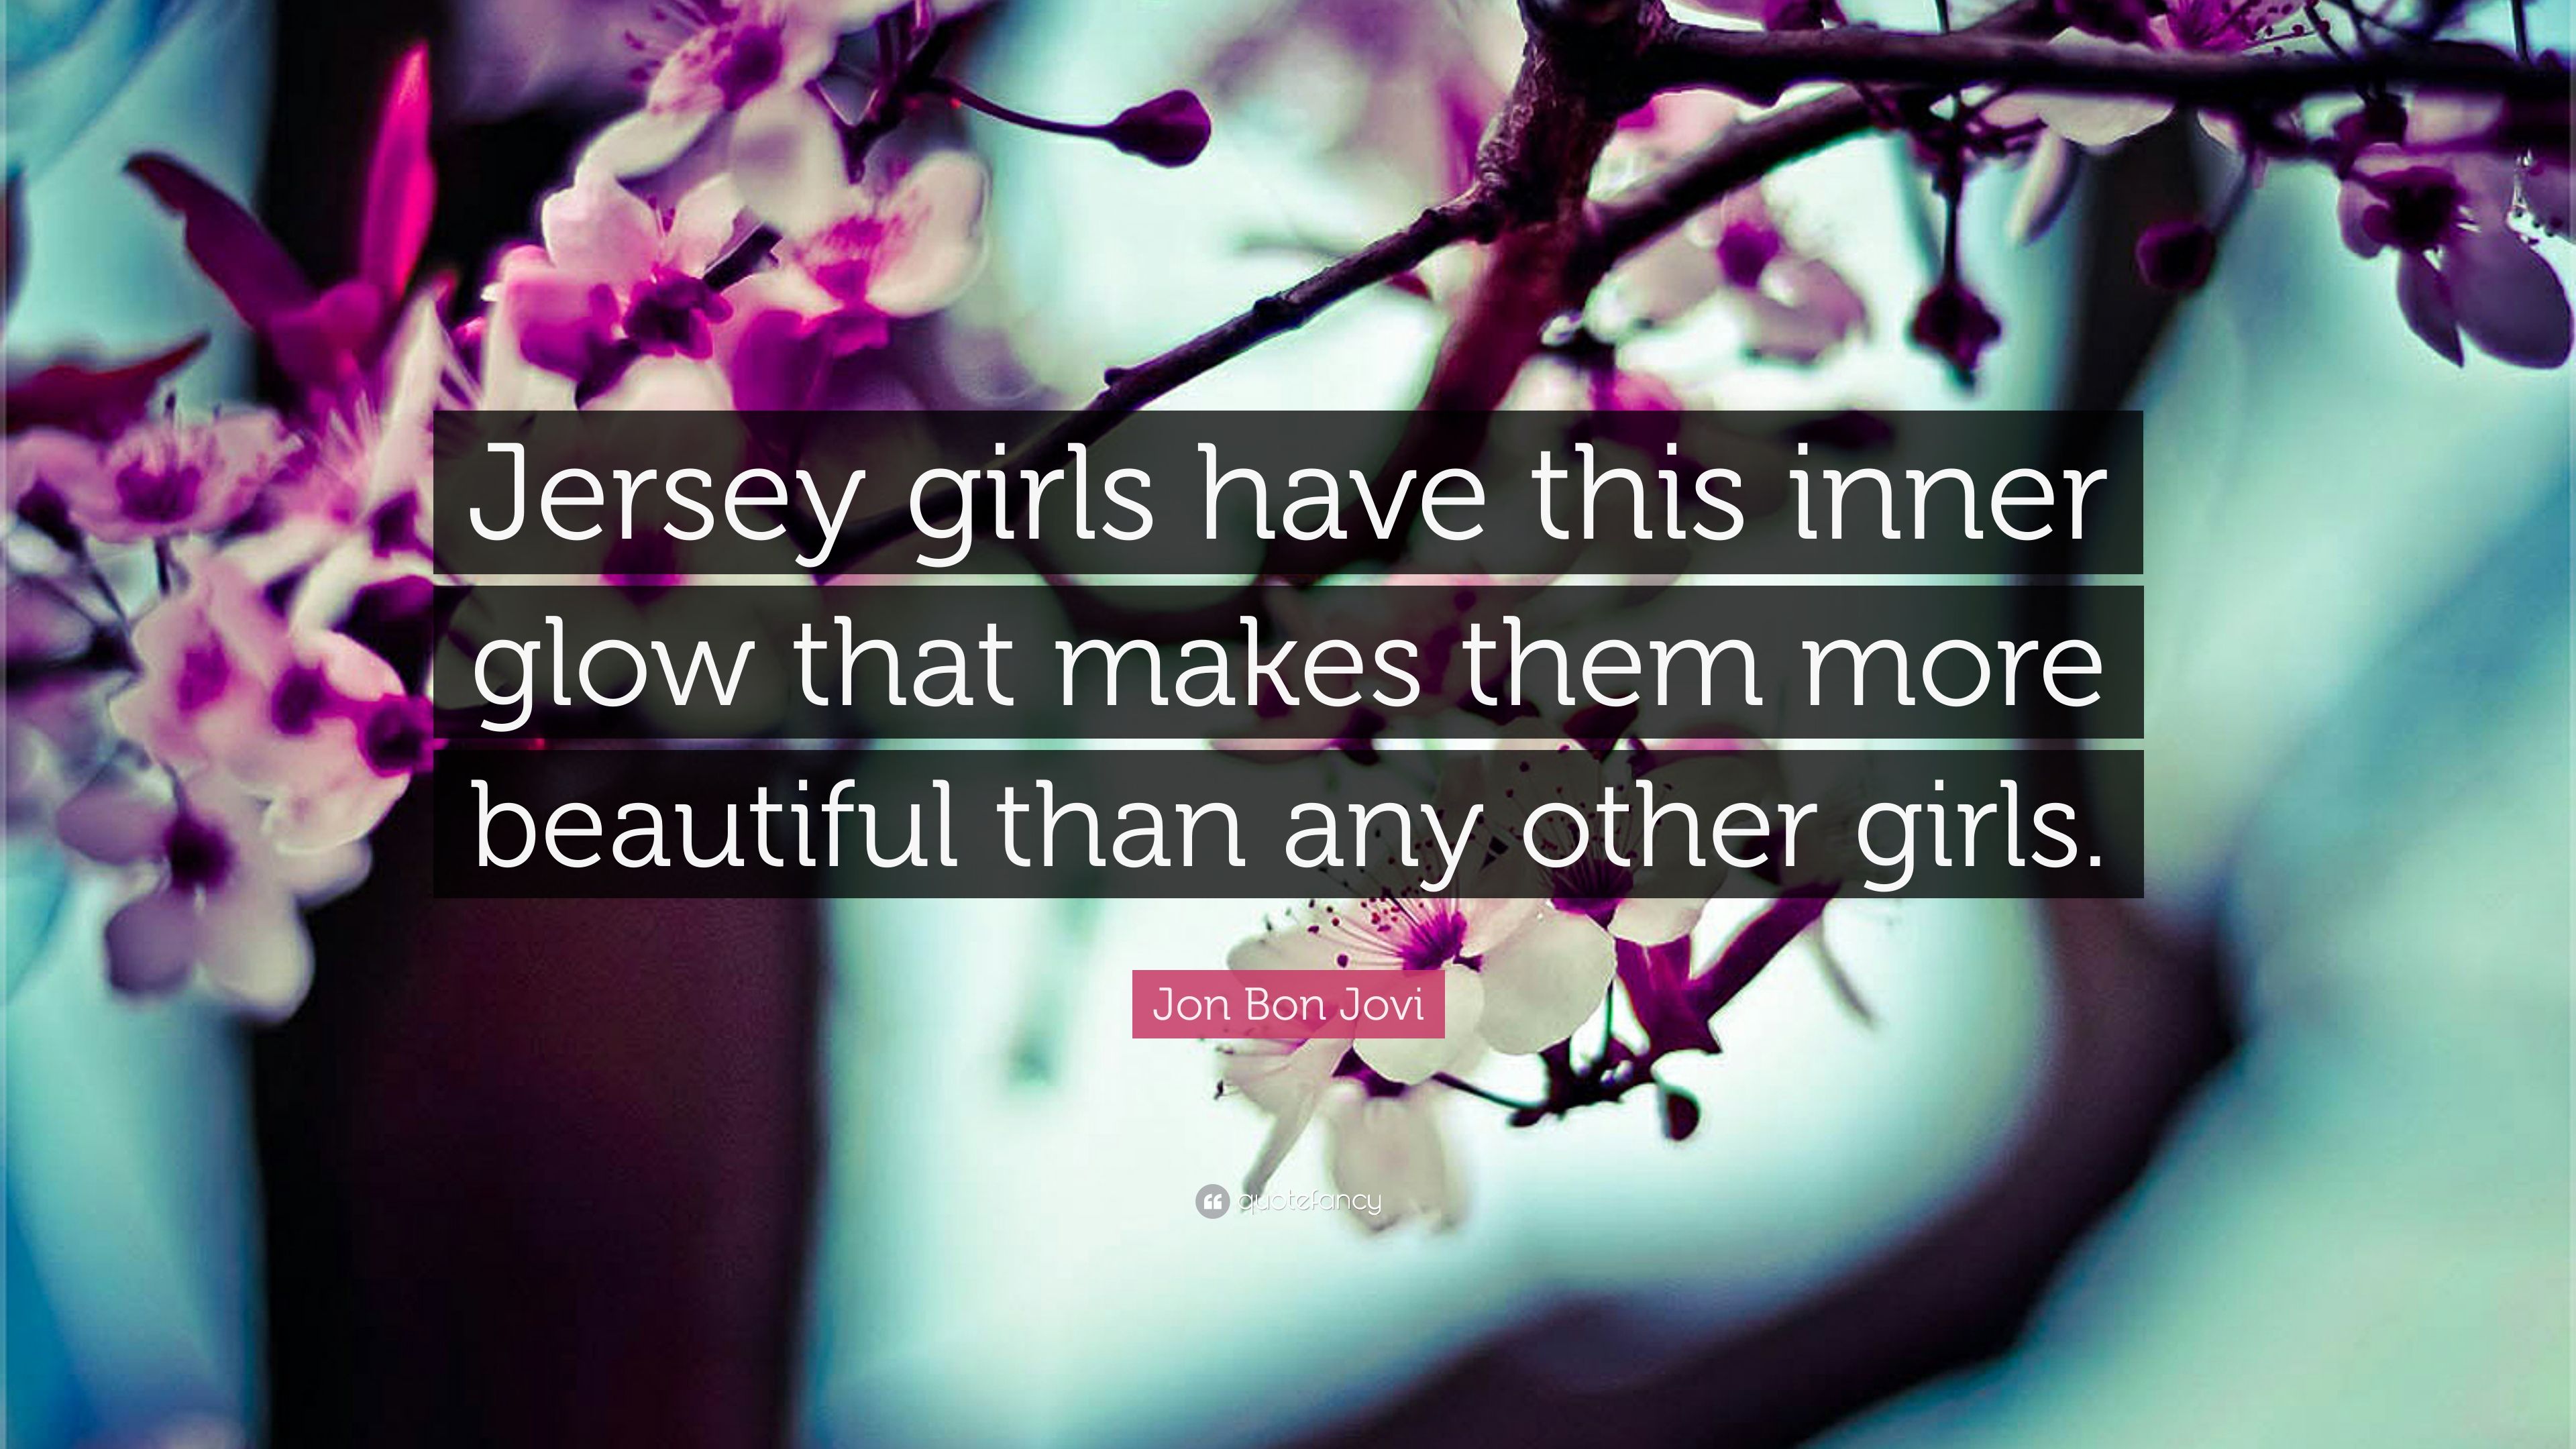 Jon Bon Jovi Quote: “Jersey girls have this inner glow that makes them more beautiful than any other girls.” (10 wallpaper)